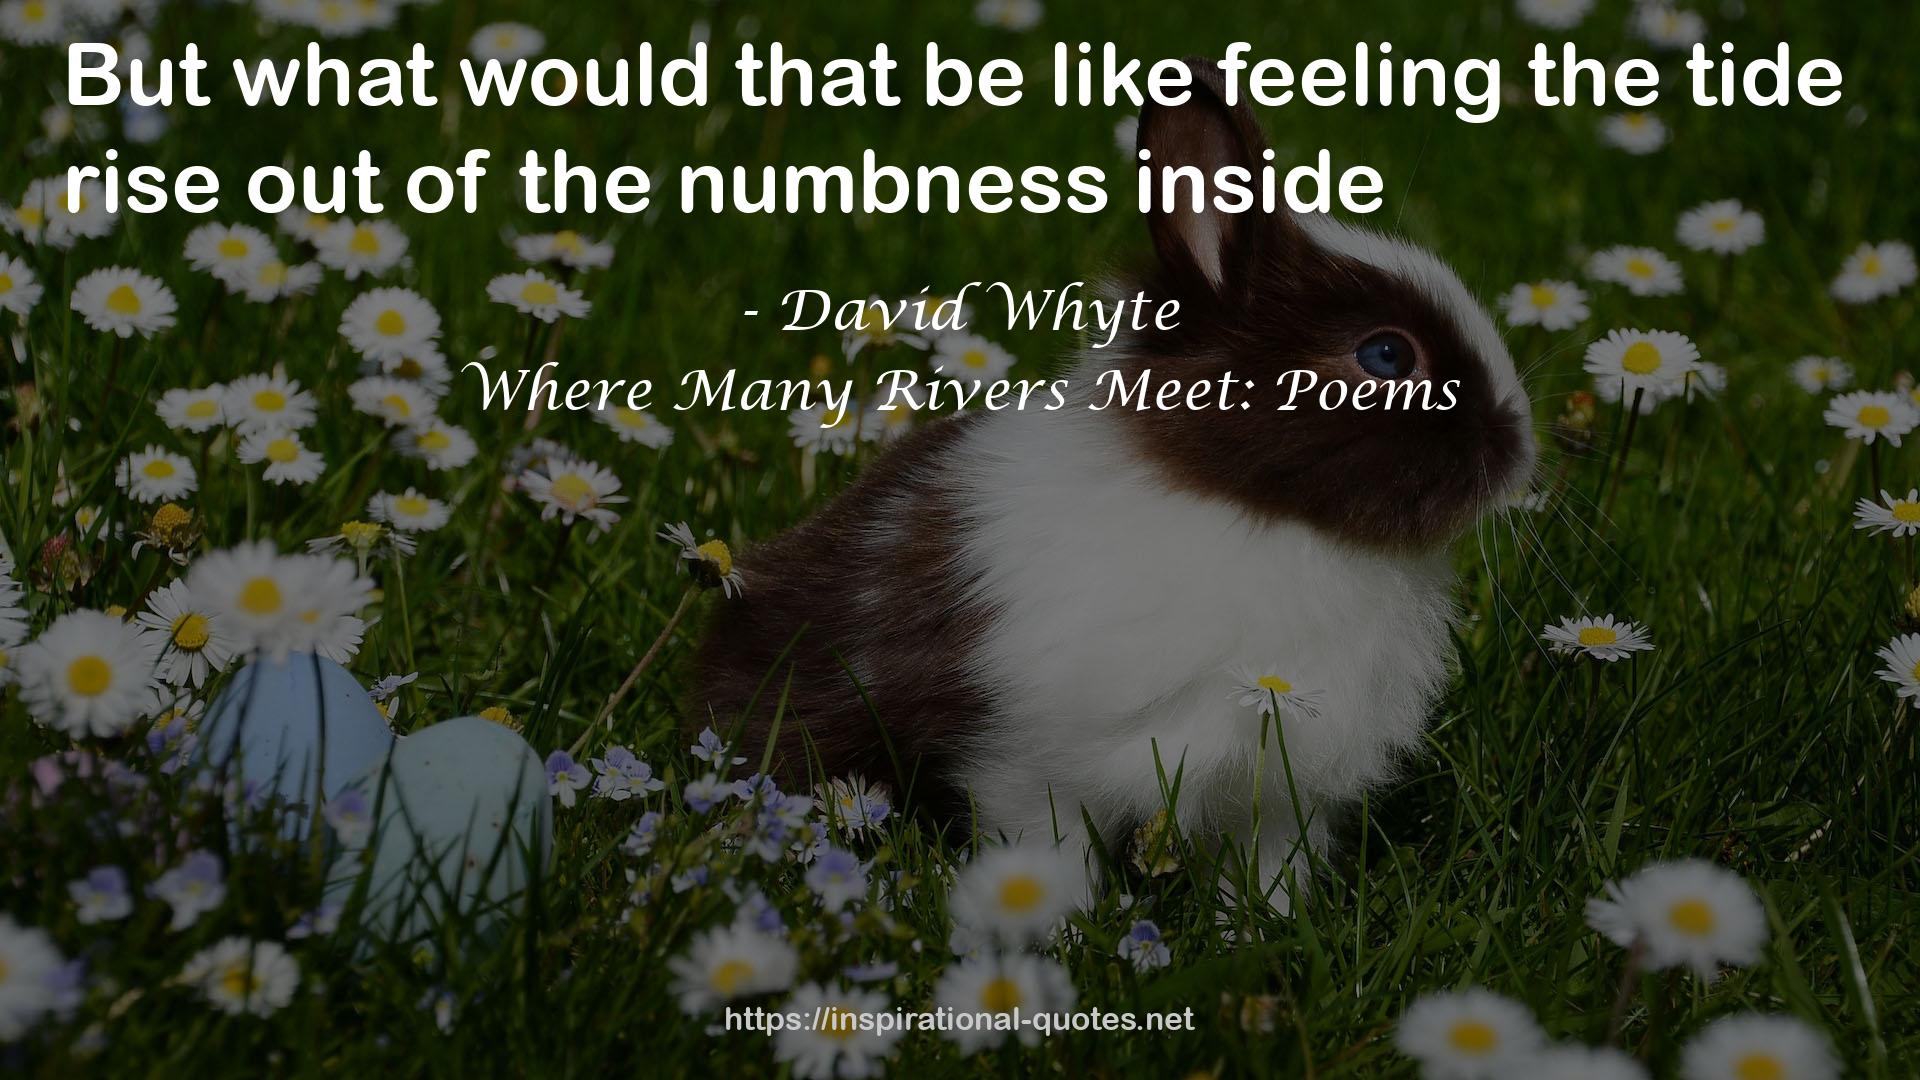 Where Many Rivers Meet: Poems QUOTES